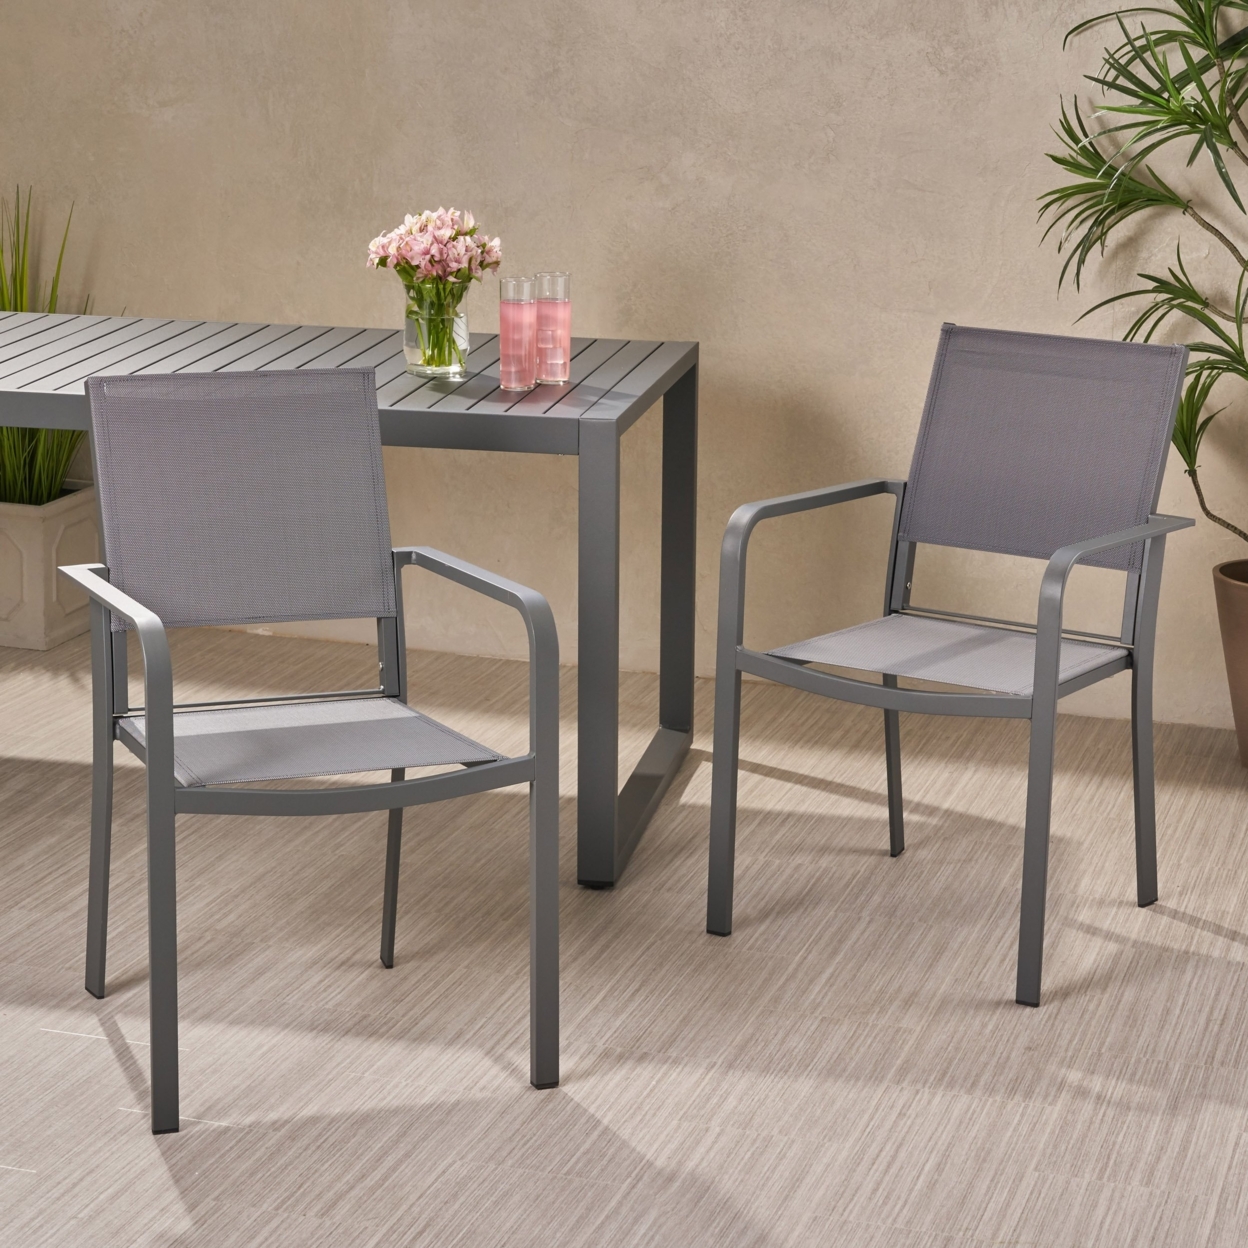 Martin Outdoor Modern Aluminum Dining Chair With Mesh Seat (Set Of 2) - Silver / Taupe